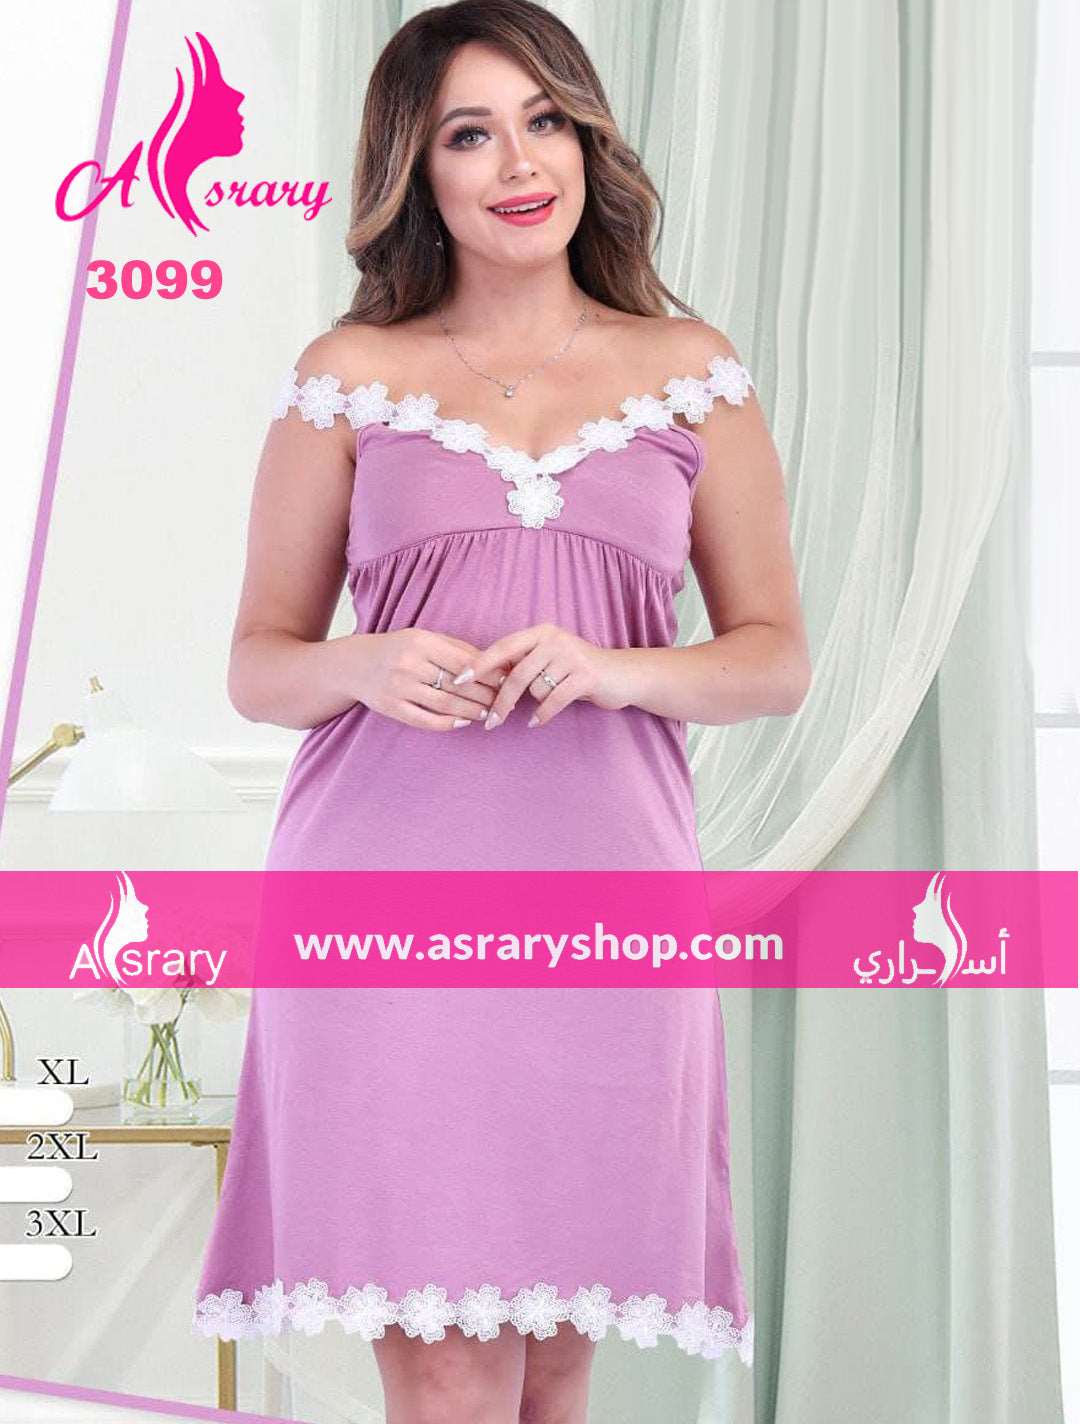 Asrary Shop Cotton Nightgown 3099